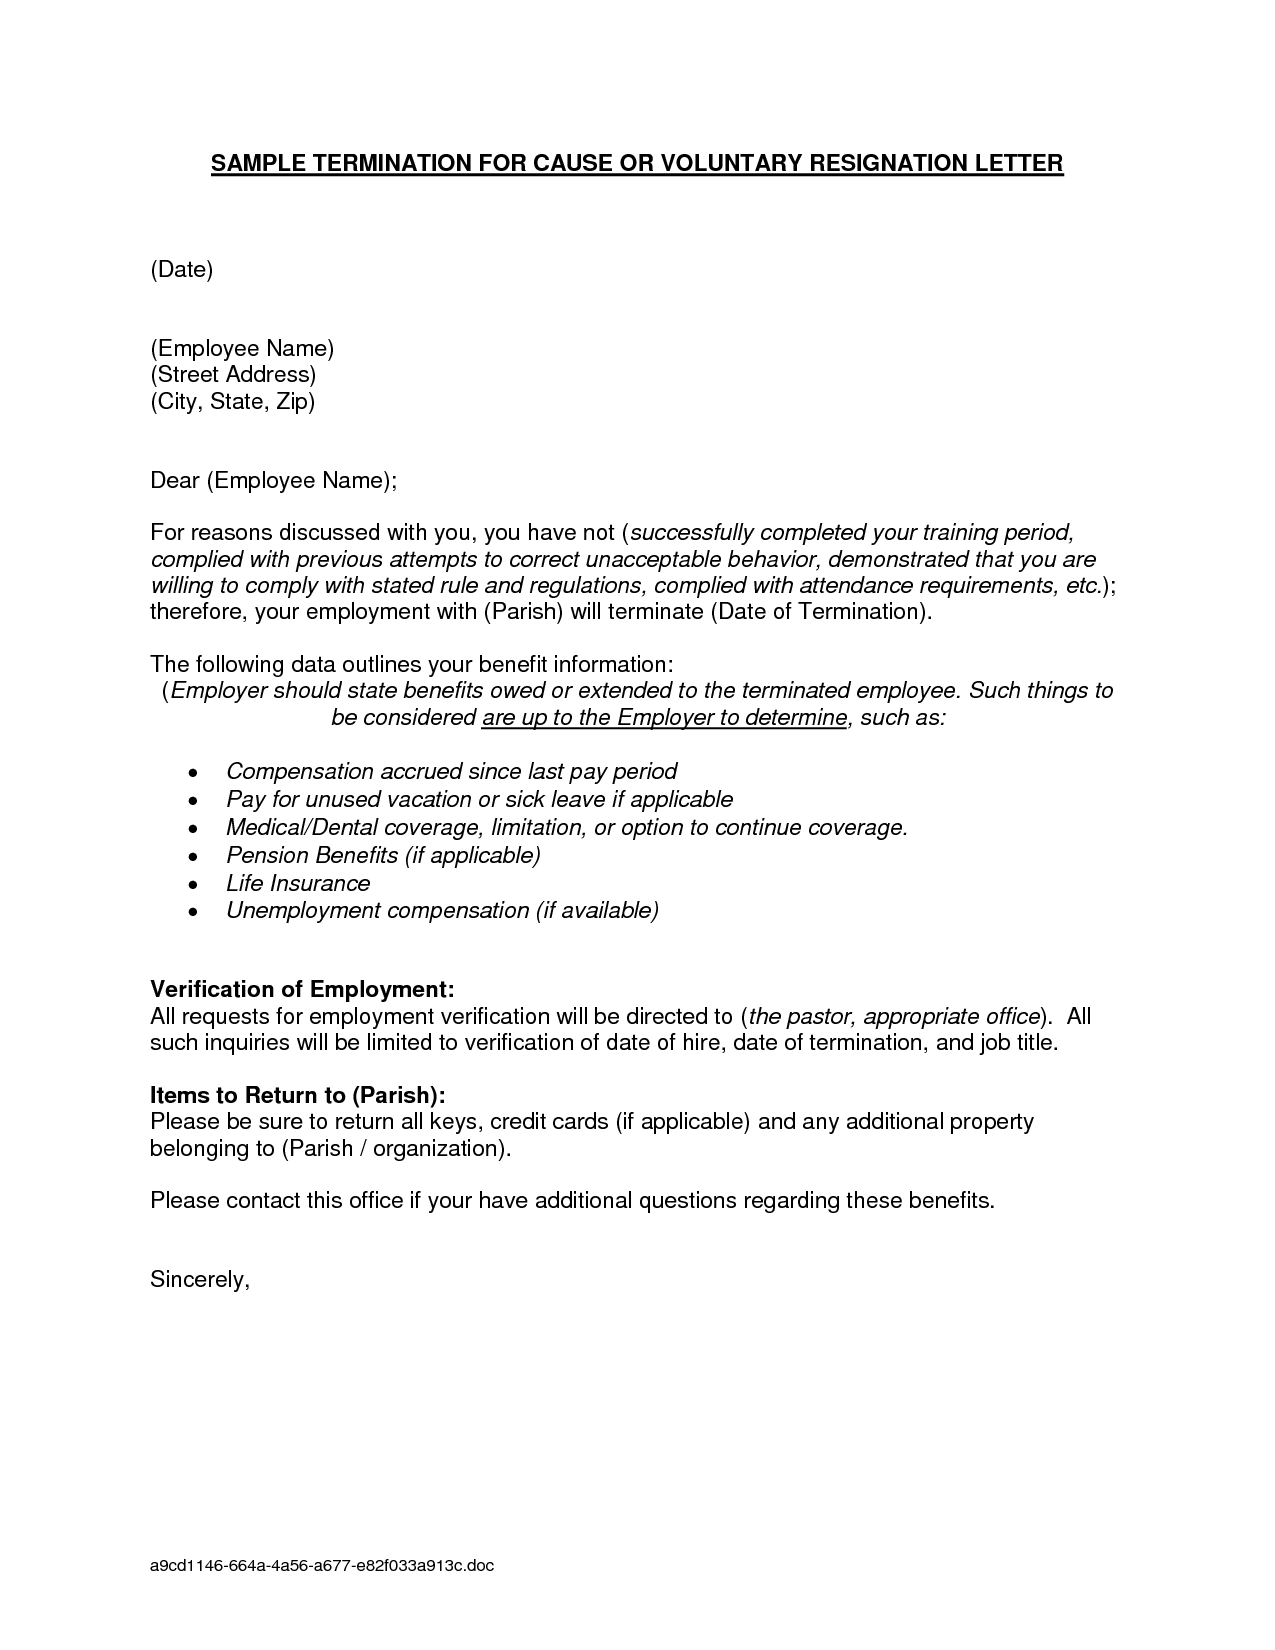 Probation Termination Letter Template - Medical Resignation Letter Sample Due Illness Example Icover